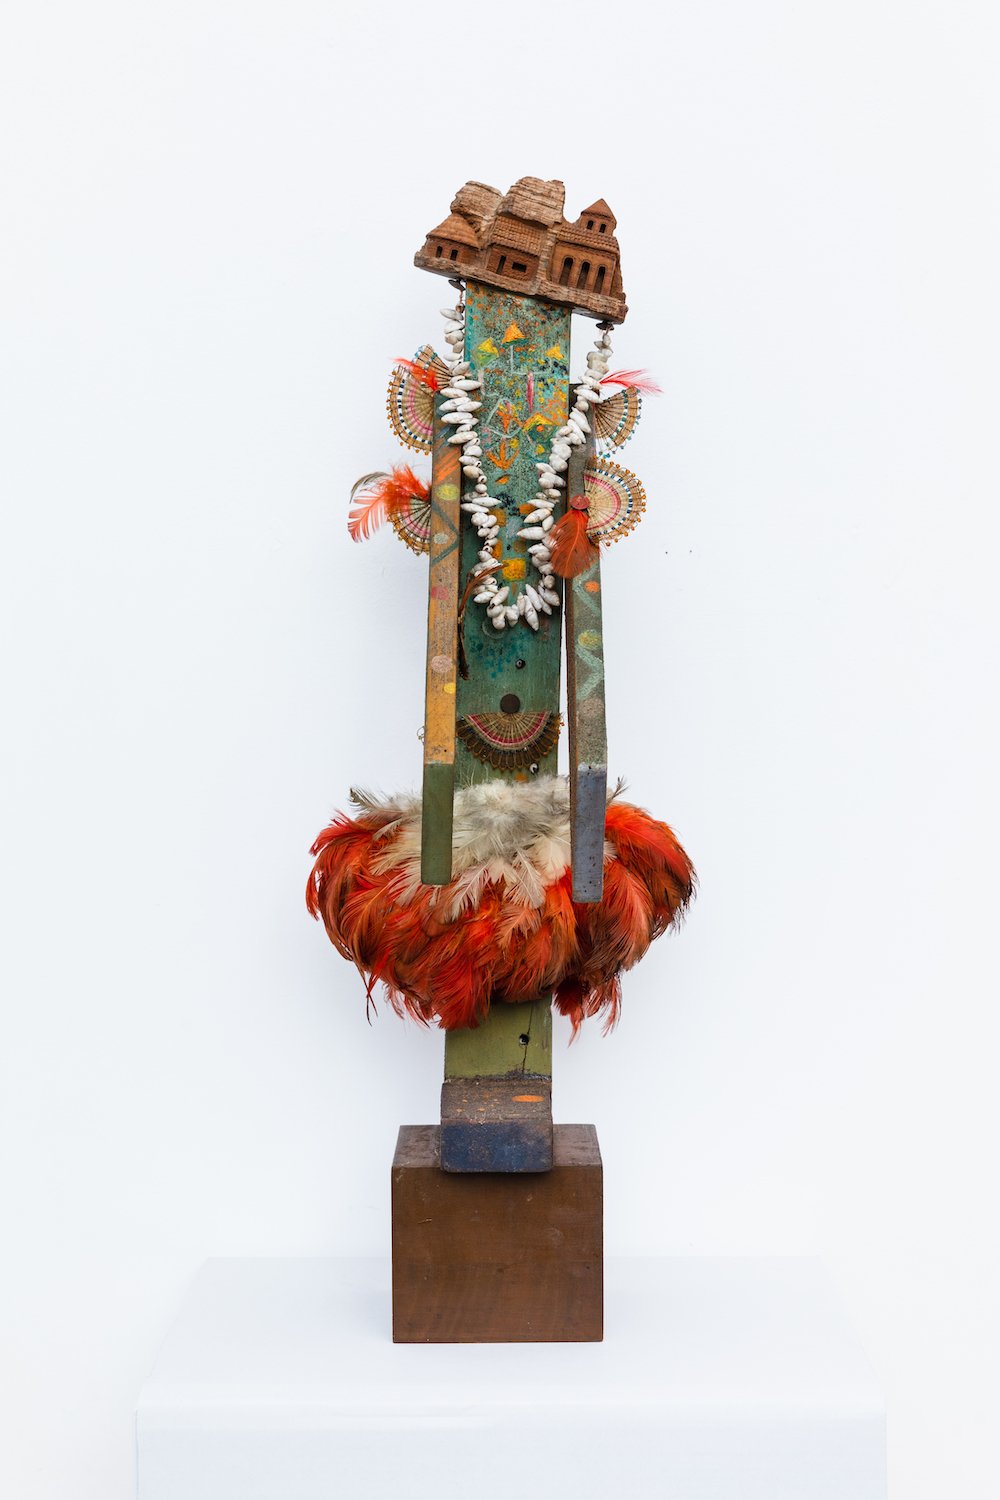  Alice Rahon,  Untitled , n/d, assemblage with wood, feathers, shells, and oil, 22 x 6 x 7 inches (55.9 x 15.2 x 17.8 cm) 